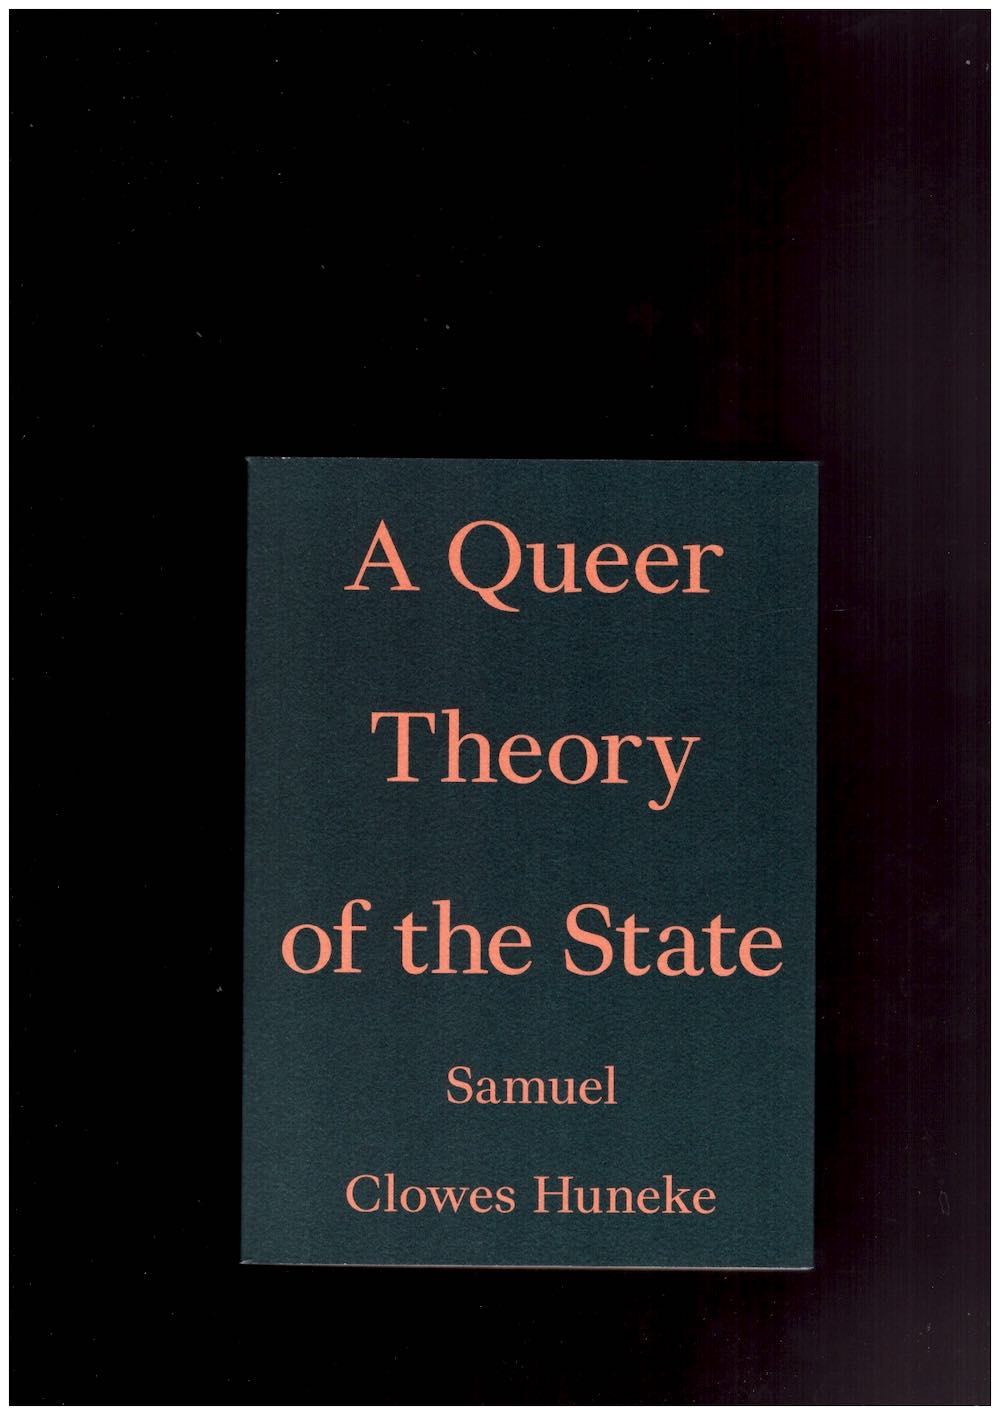 HUNEKE, Samuel Clowes - A Queer Theory of the State